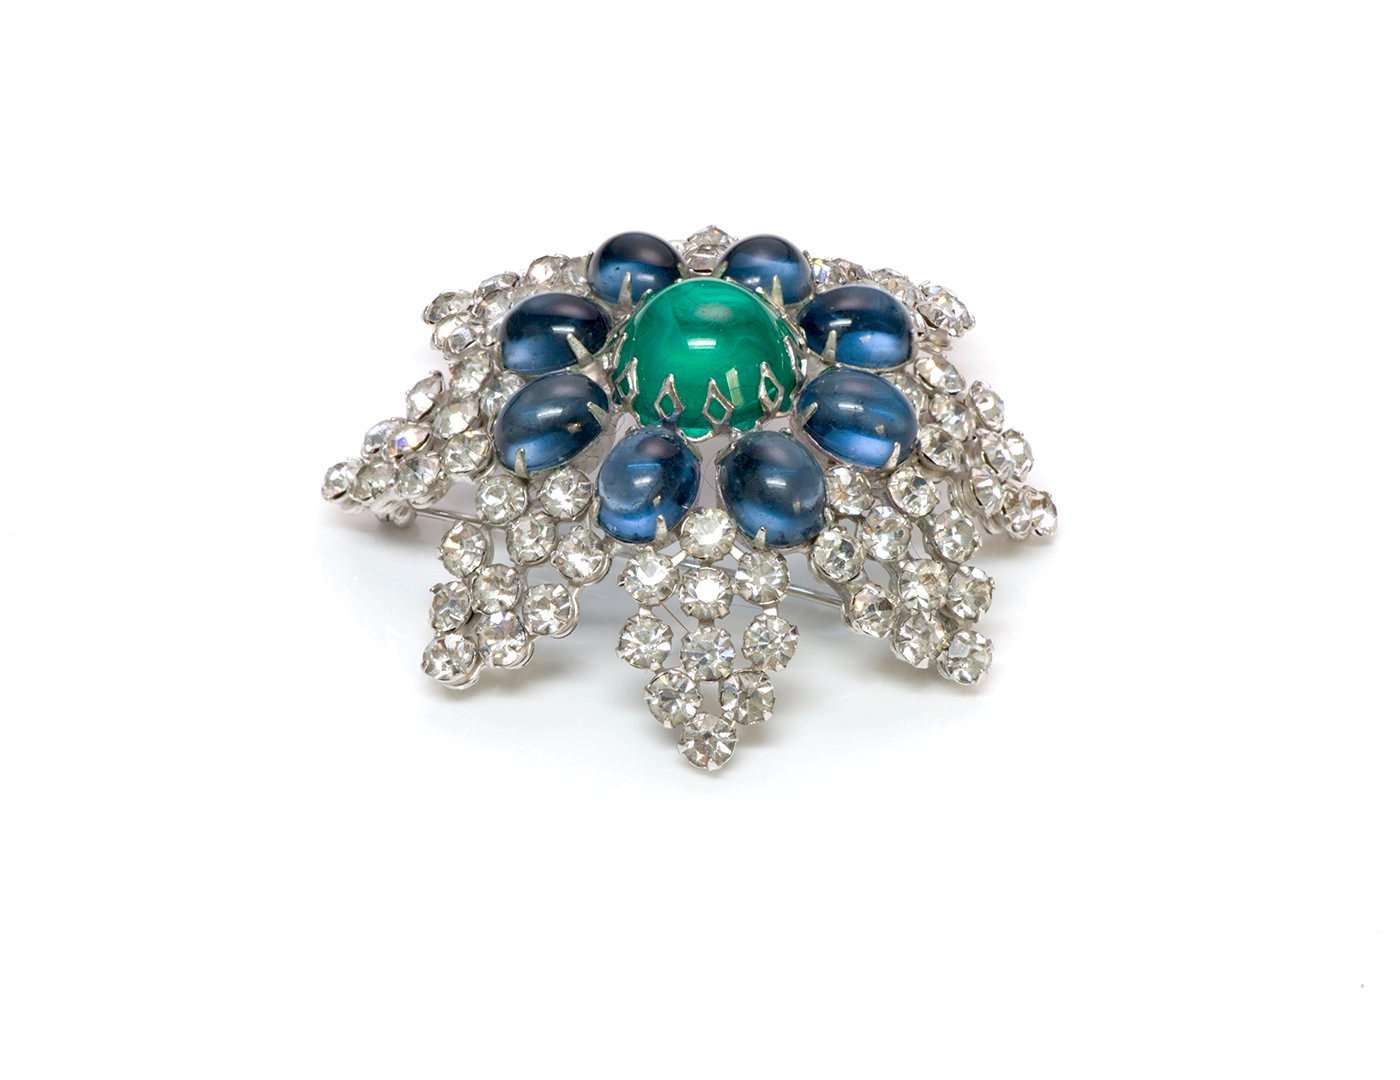 Arnold Scaasi Couture Faux Emerald Sapphire Cabochon Glass Brooch